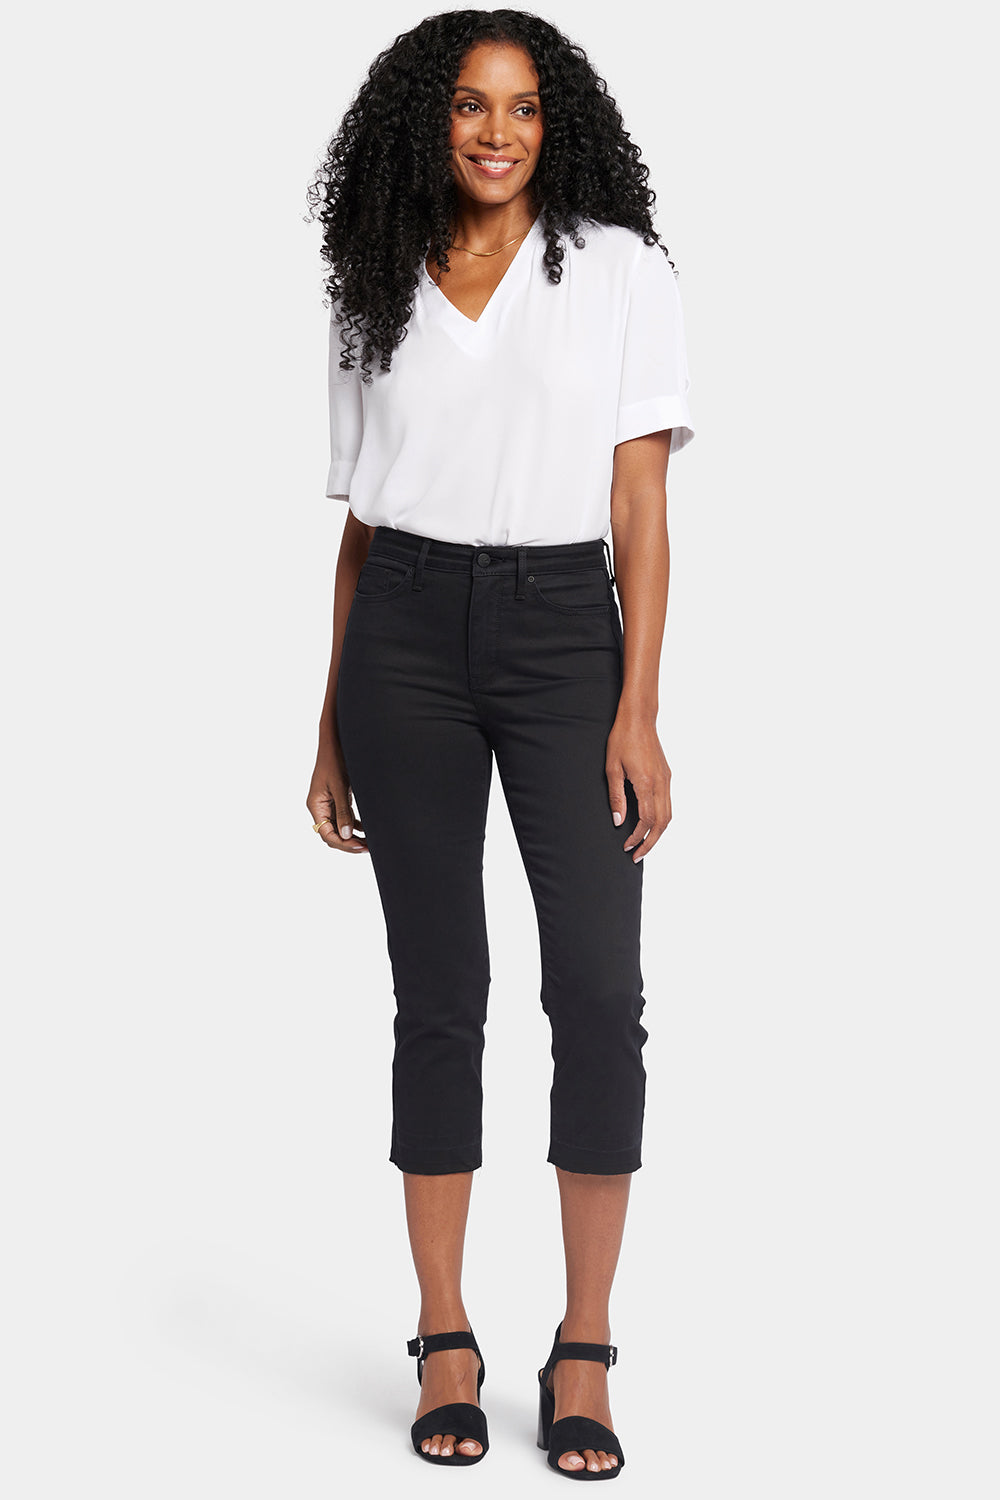 NYDJ Chloe Capri Jeans With High Rise And Released Hems - Black